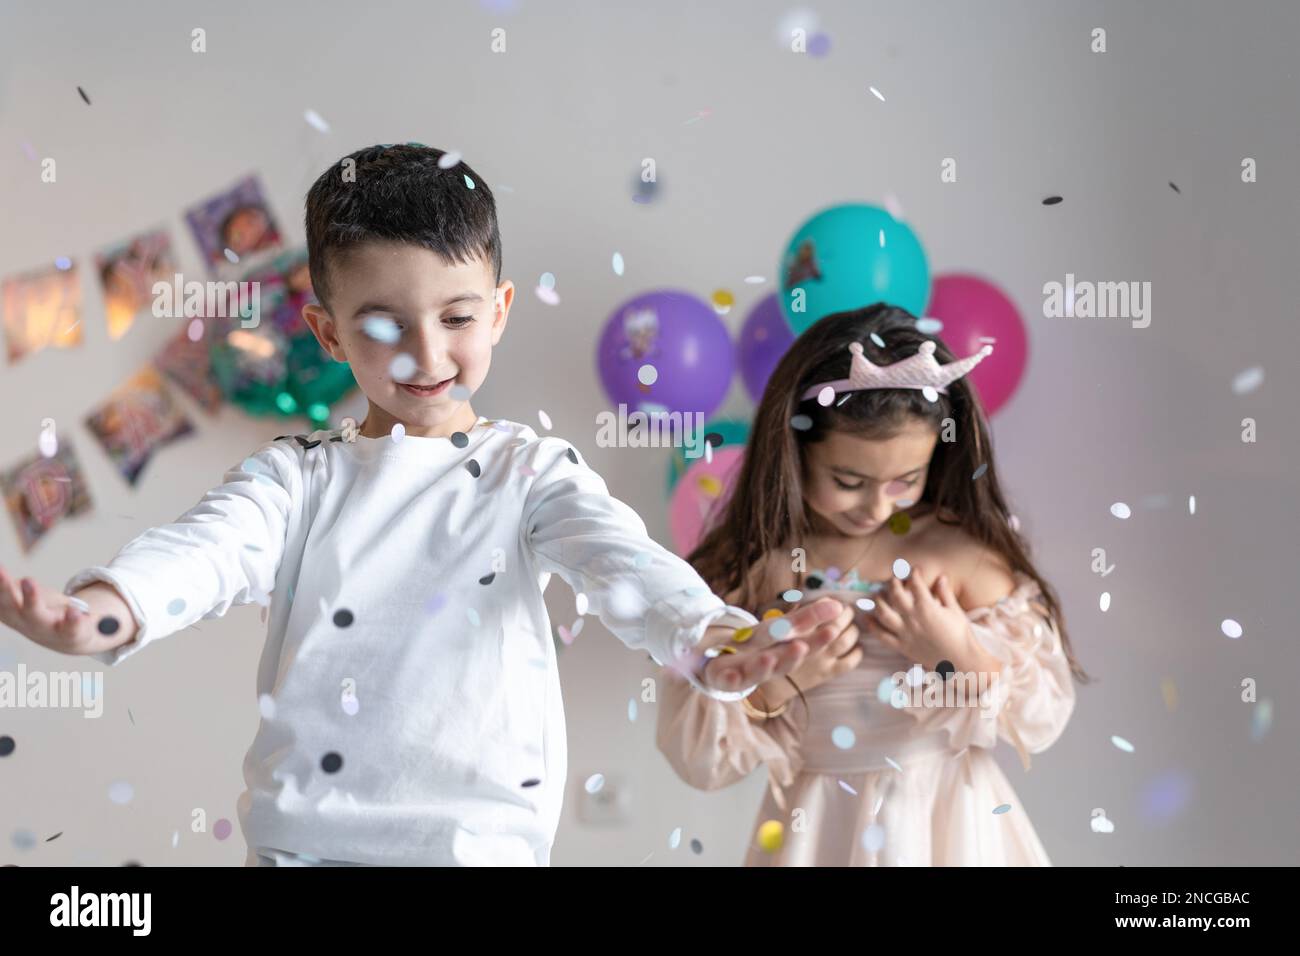 Paper multicolored confetti falling on heads of smiling happy children on birthday party. Stock Photo